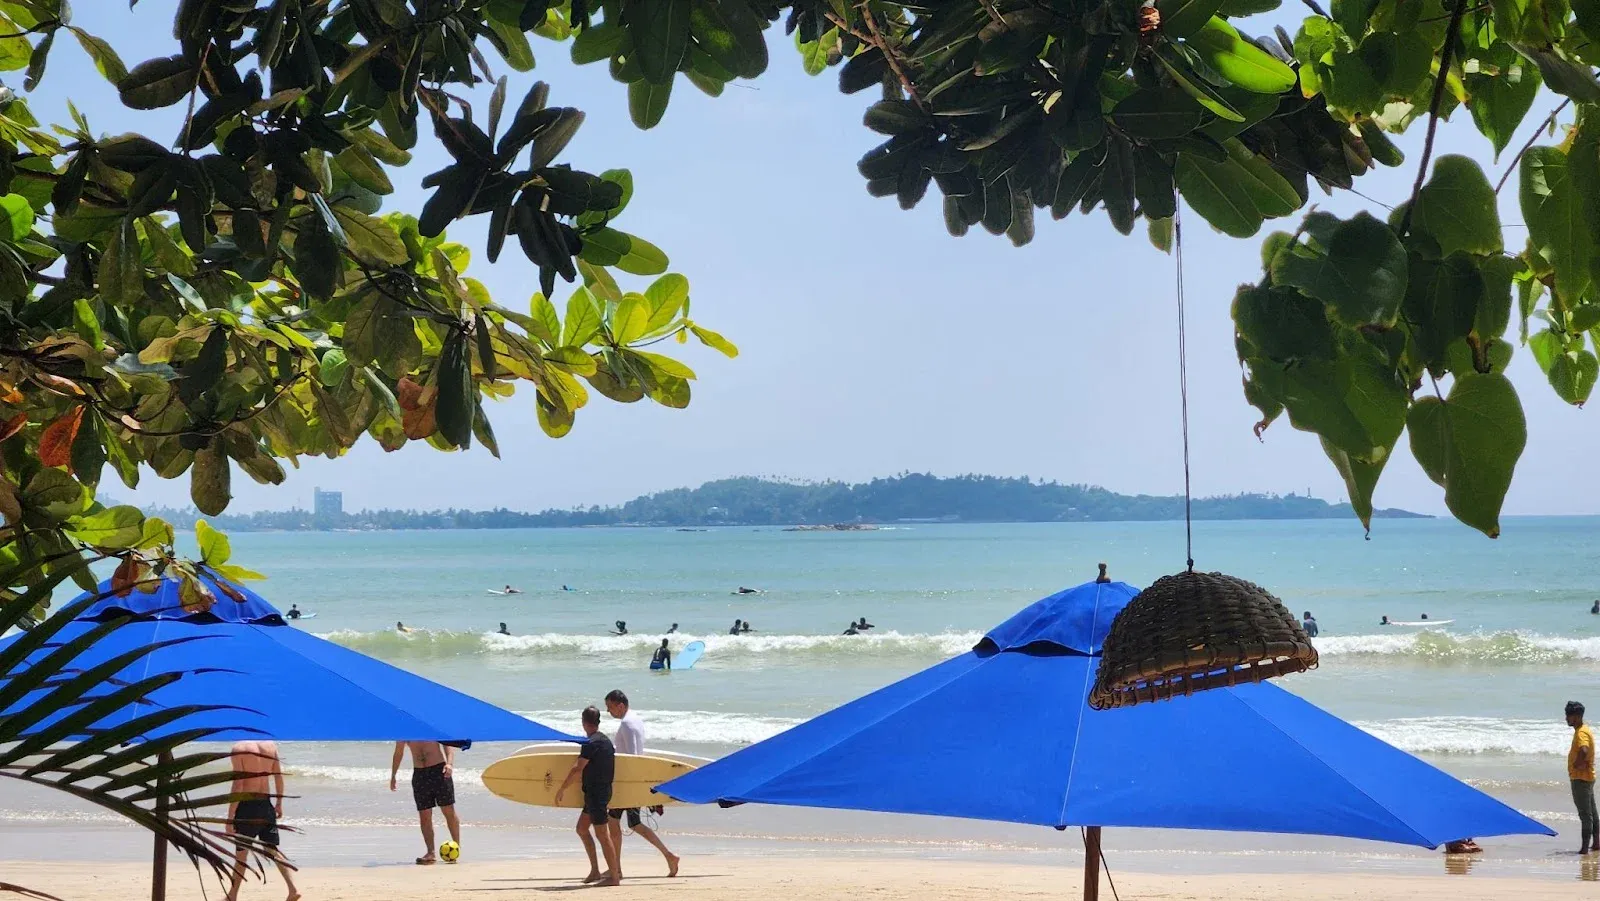 View of Weligama Beach from the main road